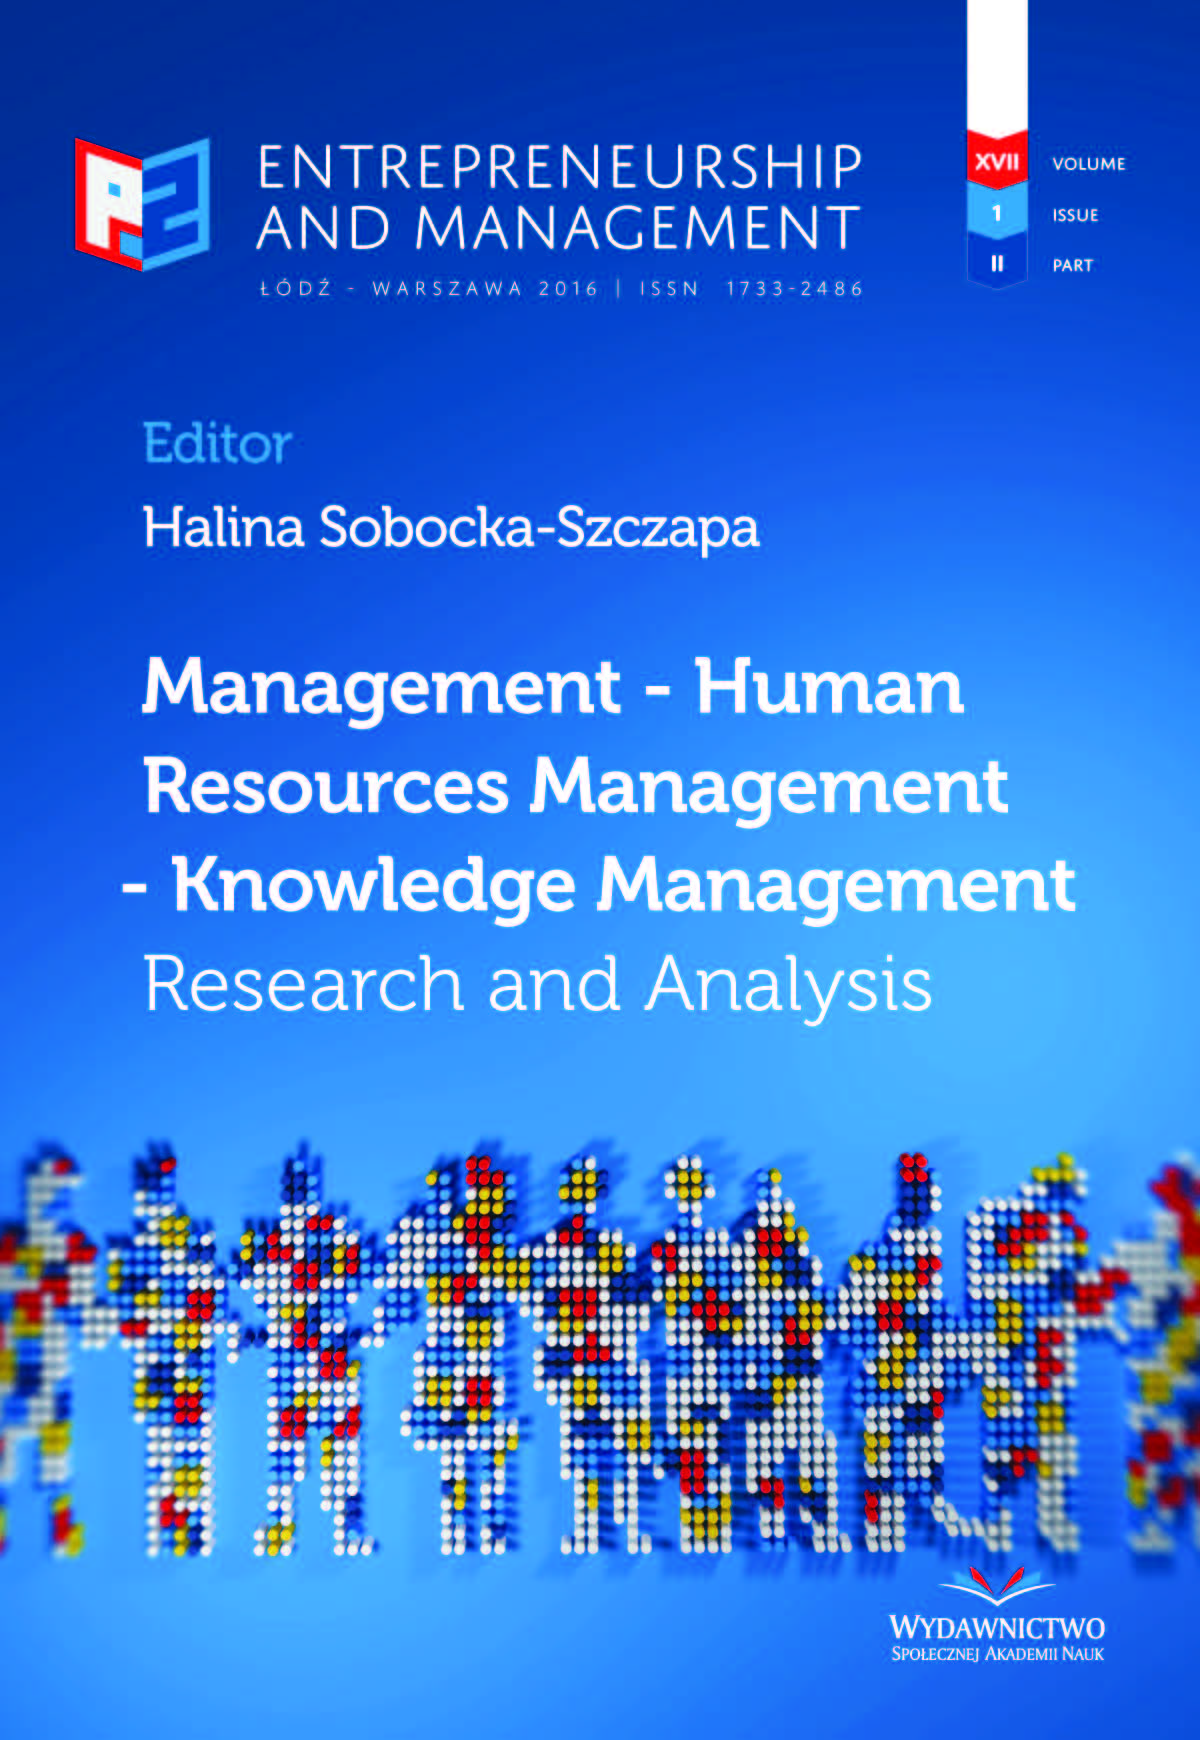 Methodological Determinants of the Organizational
Culture Research Process